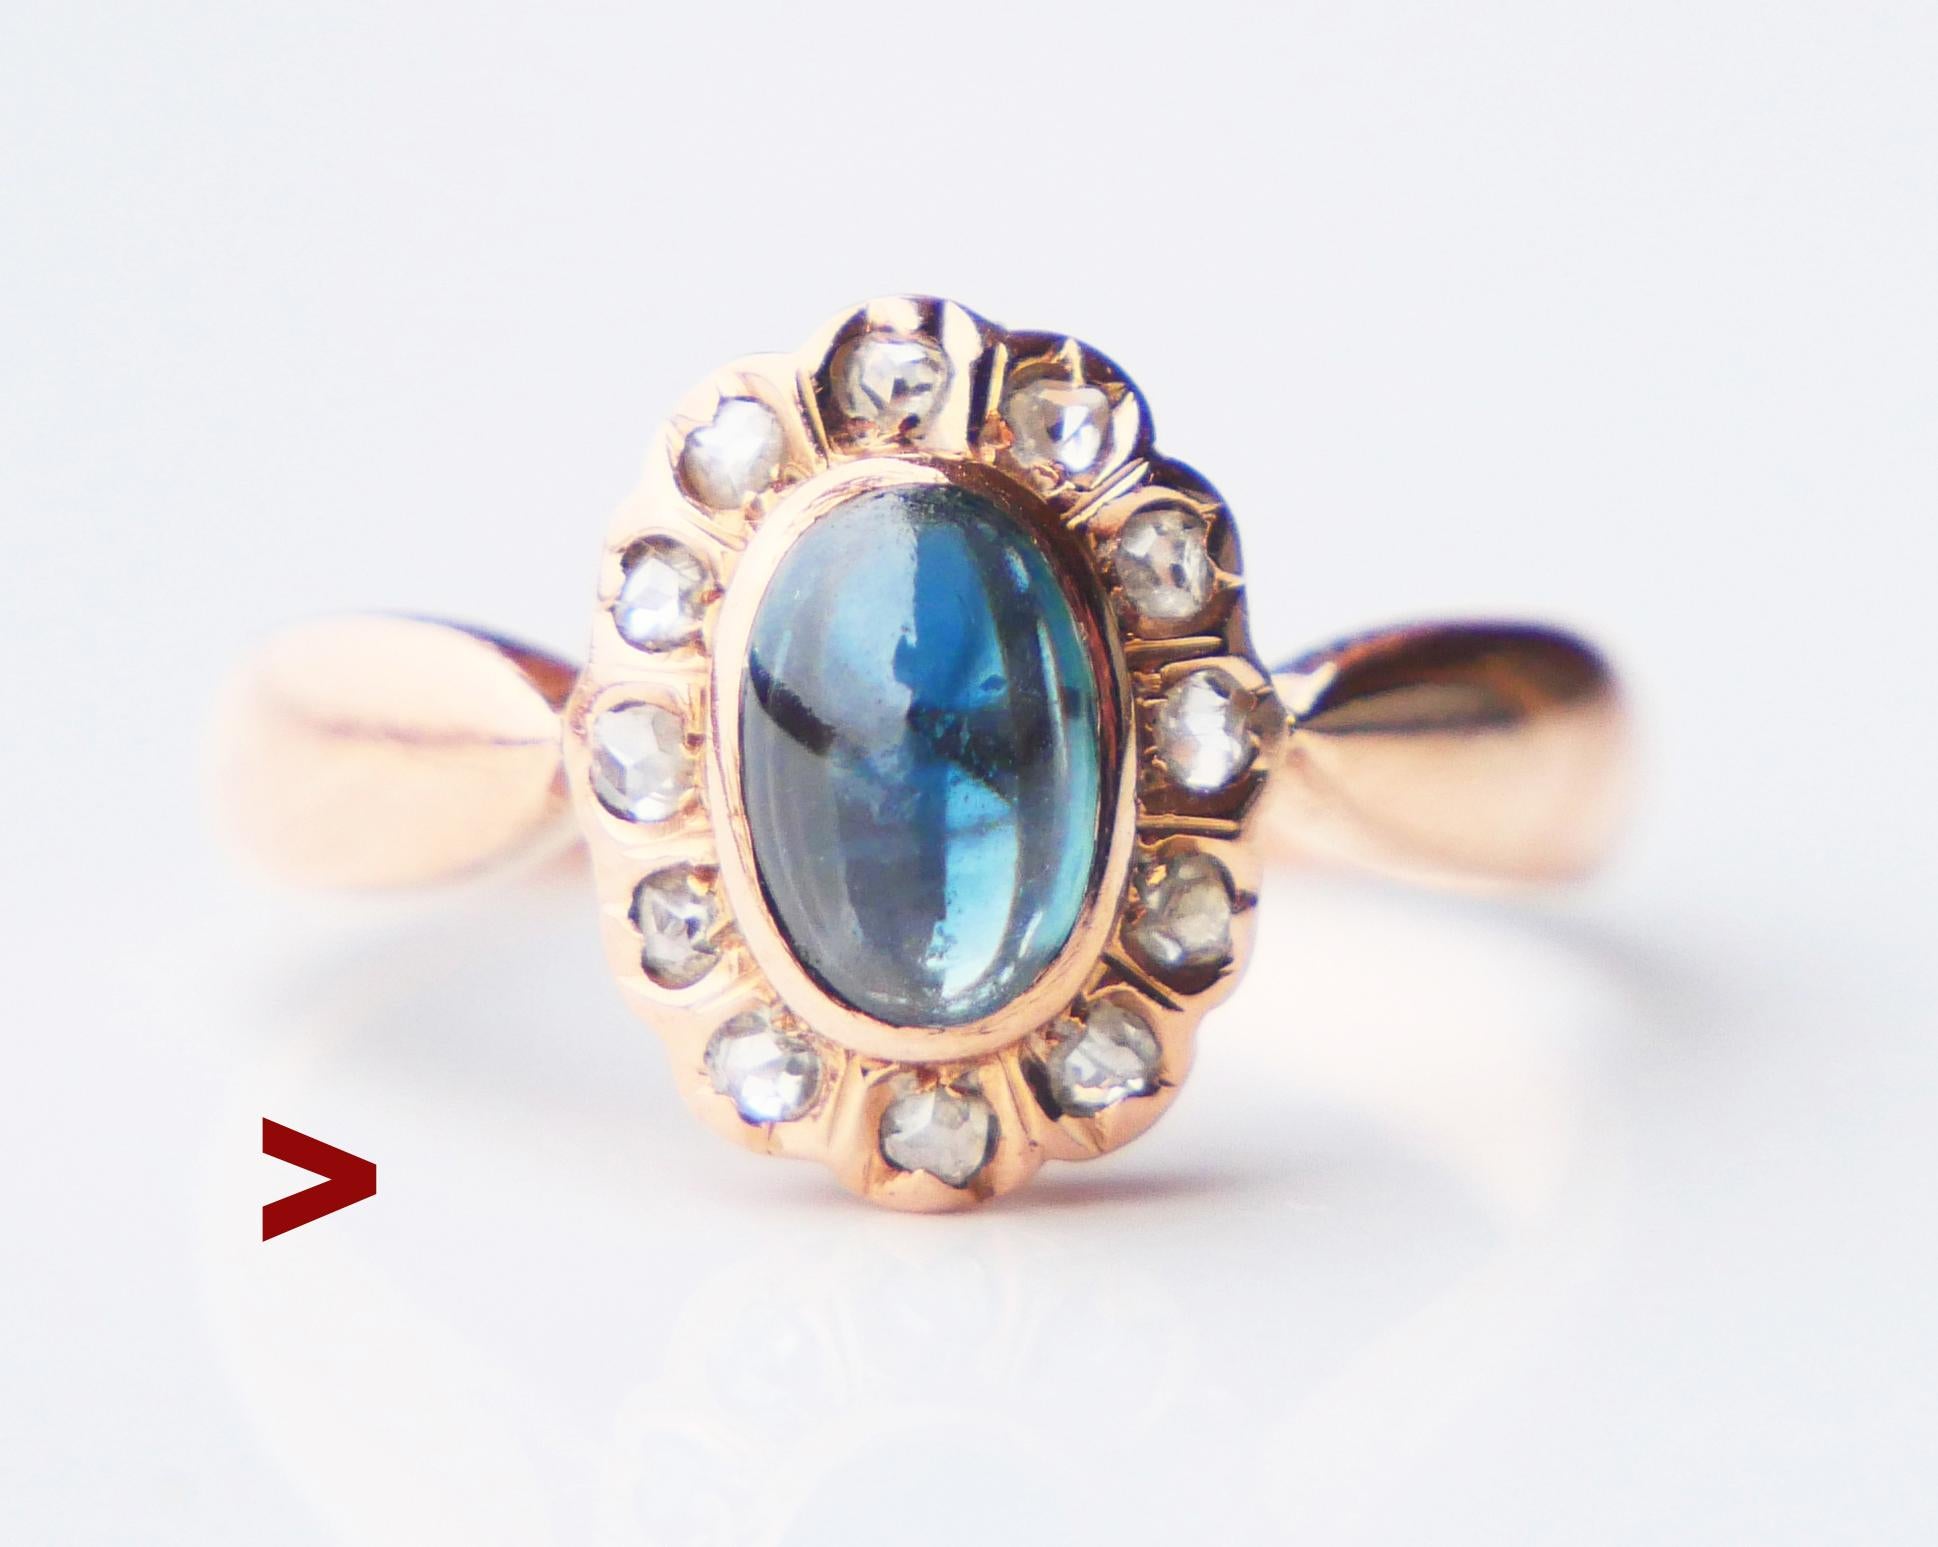 German Halo Ring with natural Blue - Green Sapphire and 12 rose-cut Diamonds.

No hallmarks, metal tested 14K Rose Gold. German ring, hand-made between the 1920s - 1930s

Crown measures 11 mm x 9 mm x 5 mm deep.

Natural Medium Blue Sapphire with